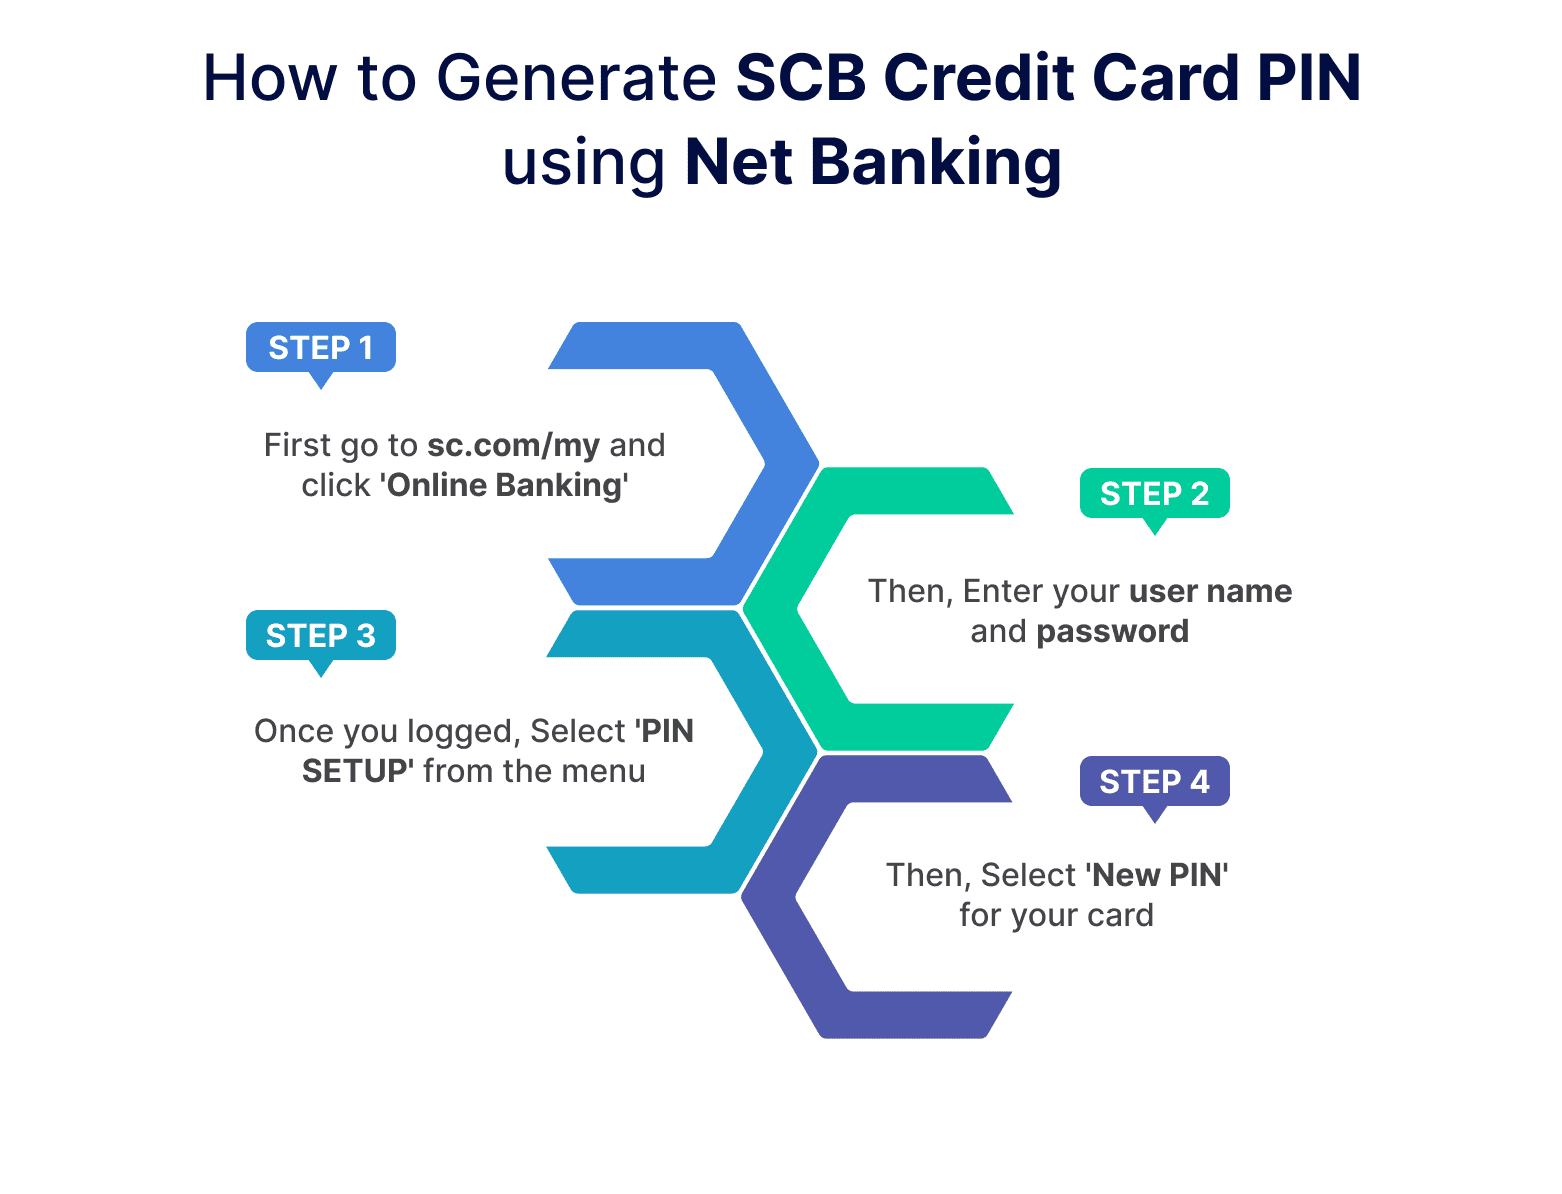 How to Generate SCB Credit Card PIN using Net Banking